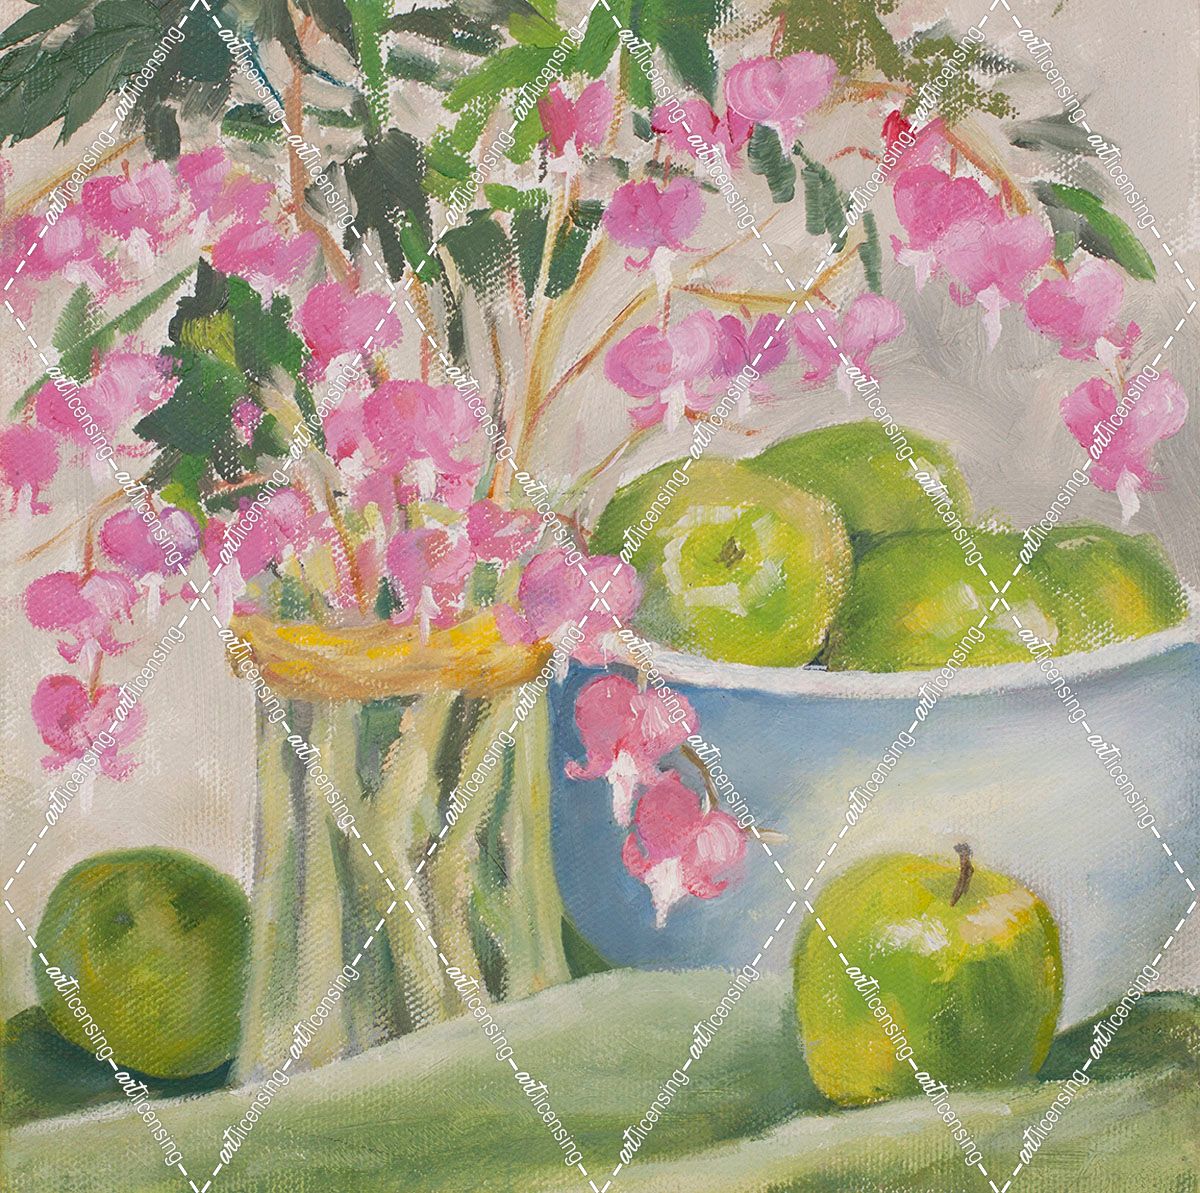 Flowers – Pink And Green Apples